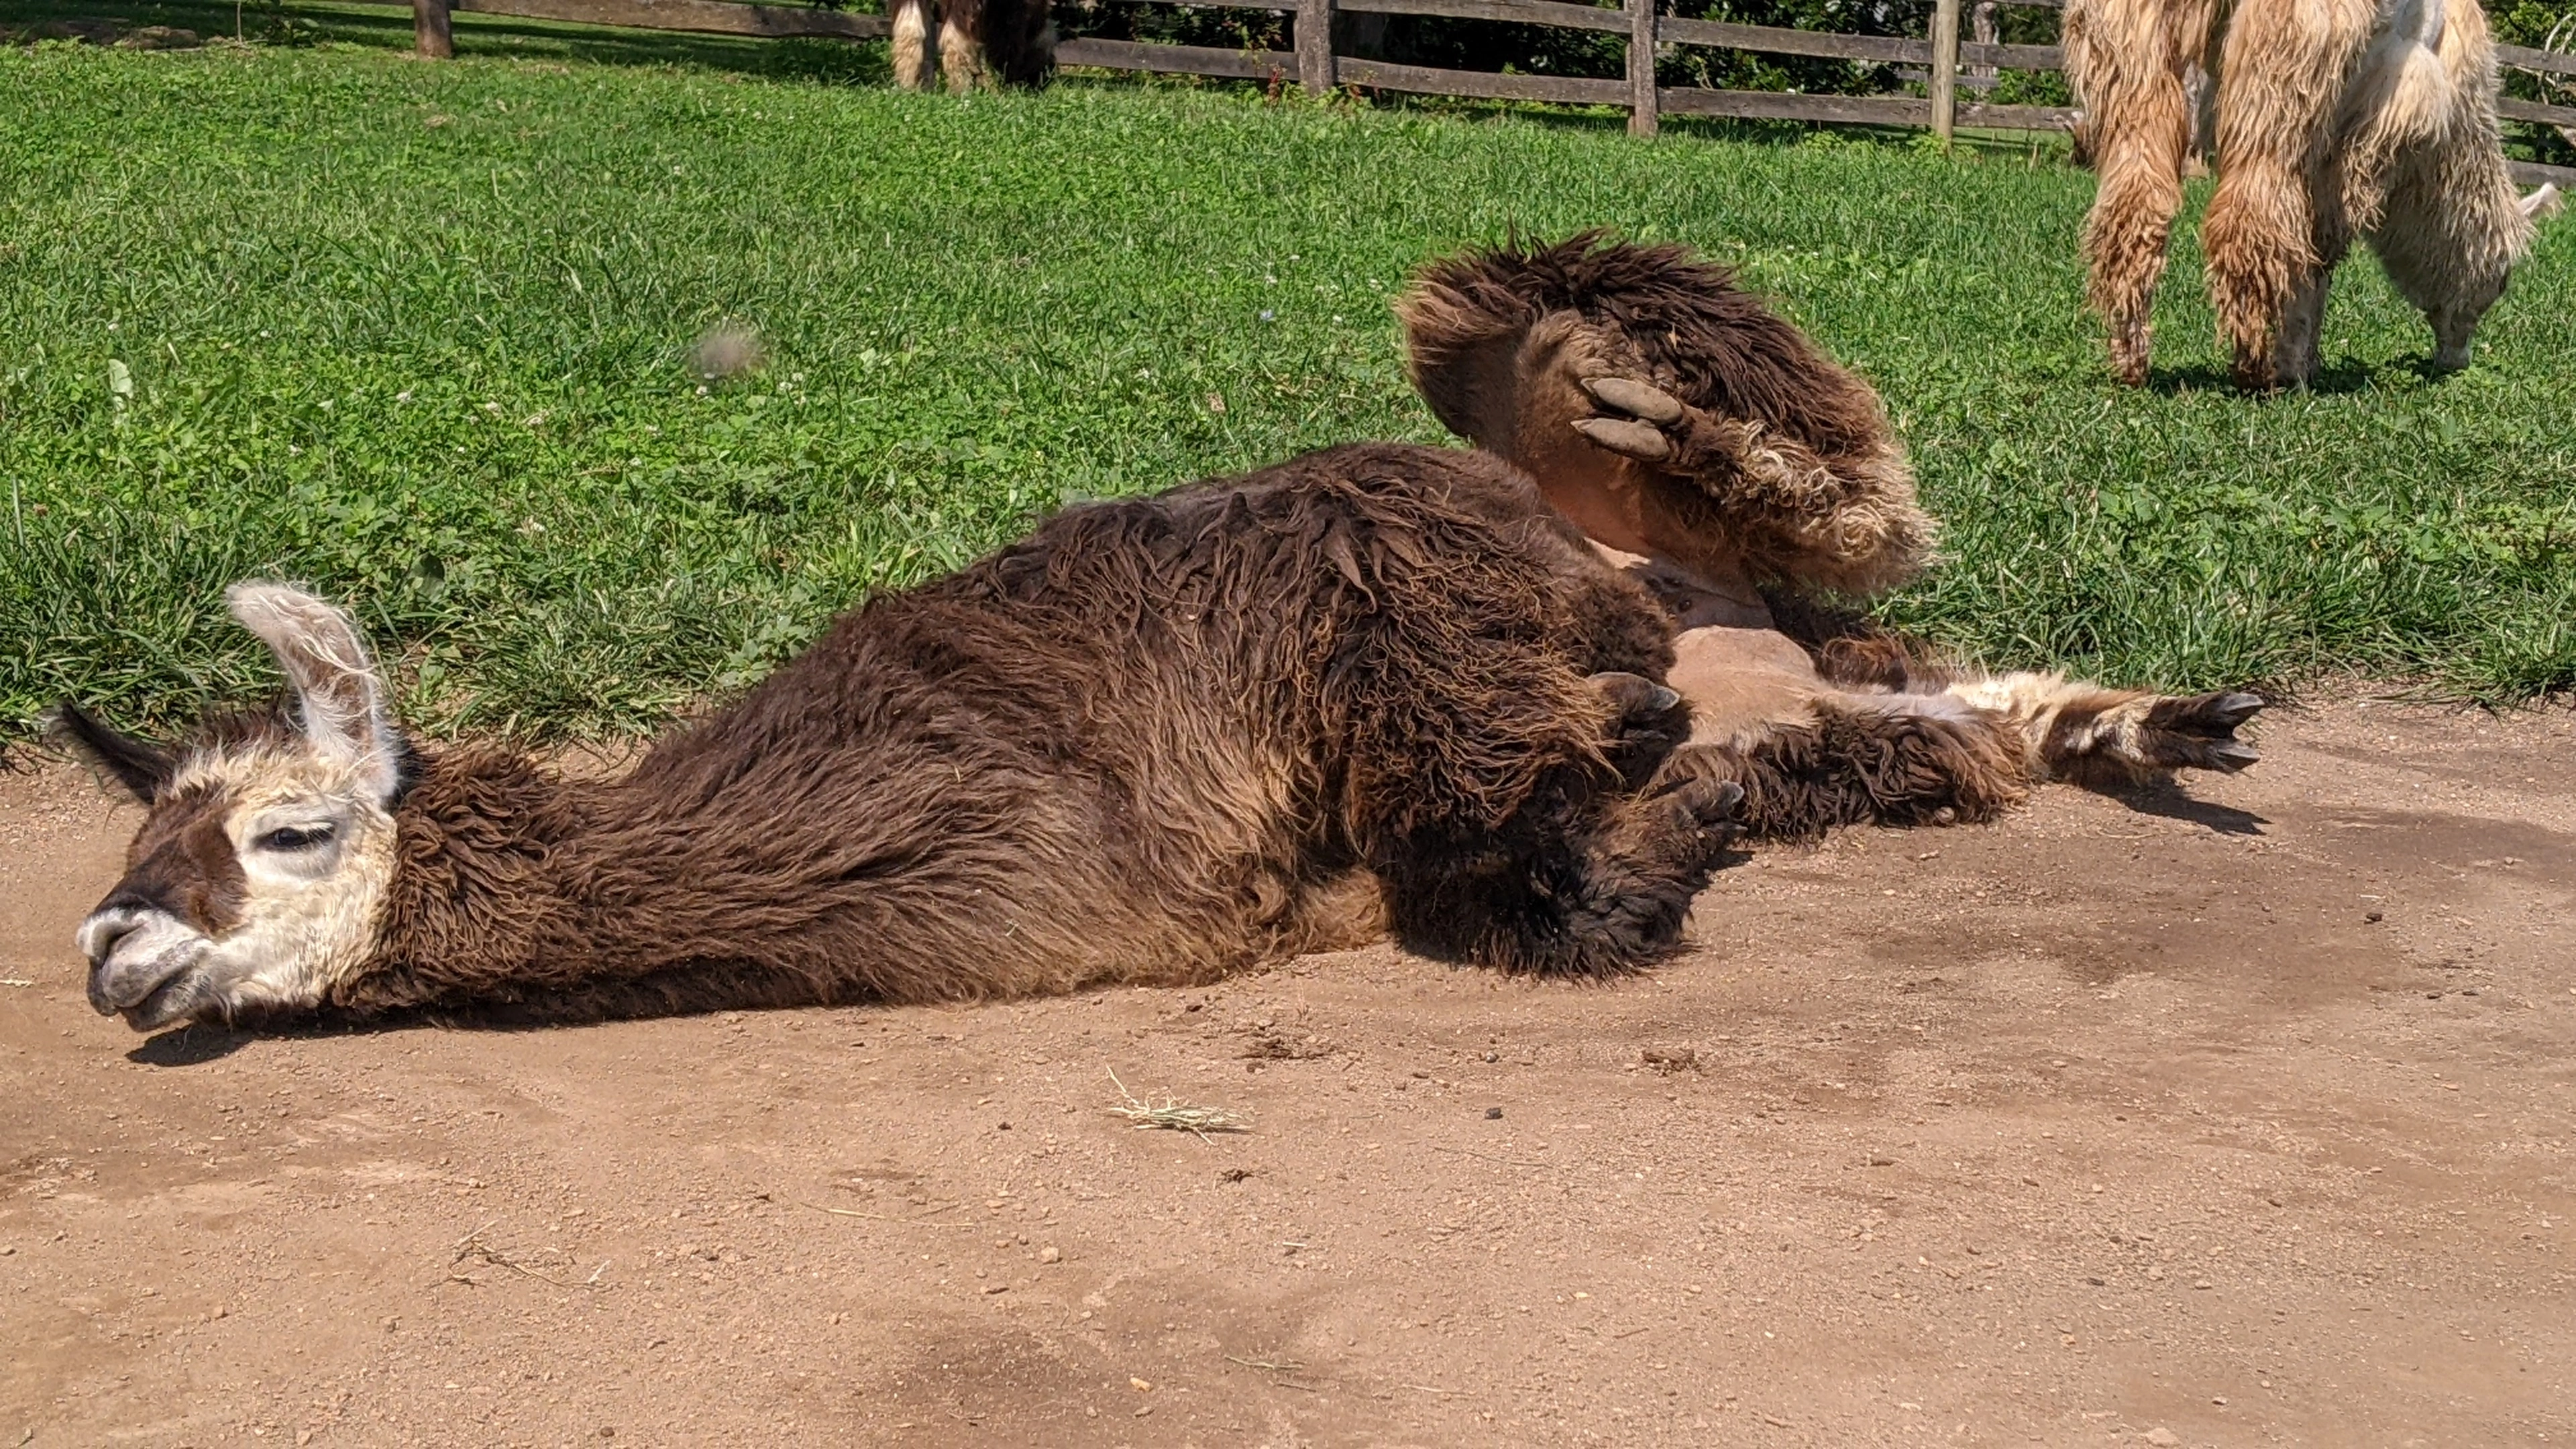 An image of a llama named Kabooki rolling in the dirt